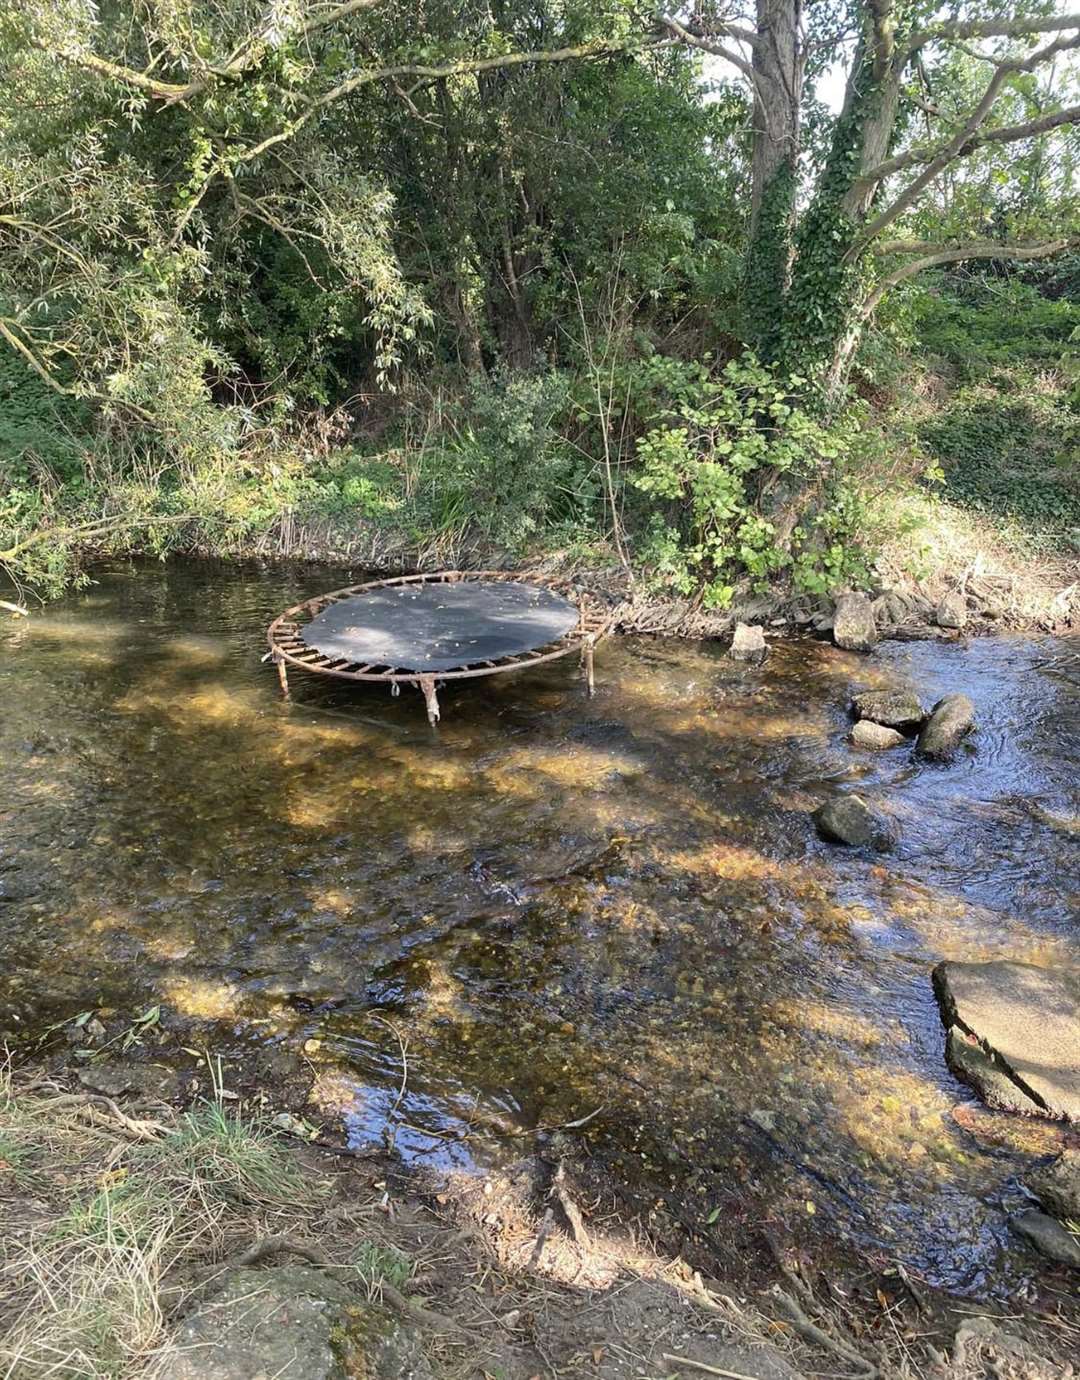 A full-sized trampoline was spotted in the River Darent